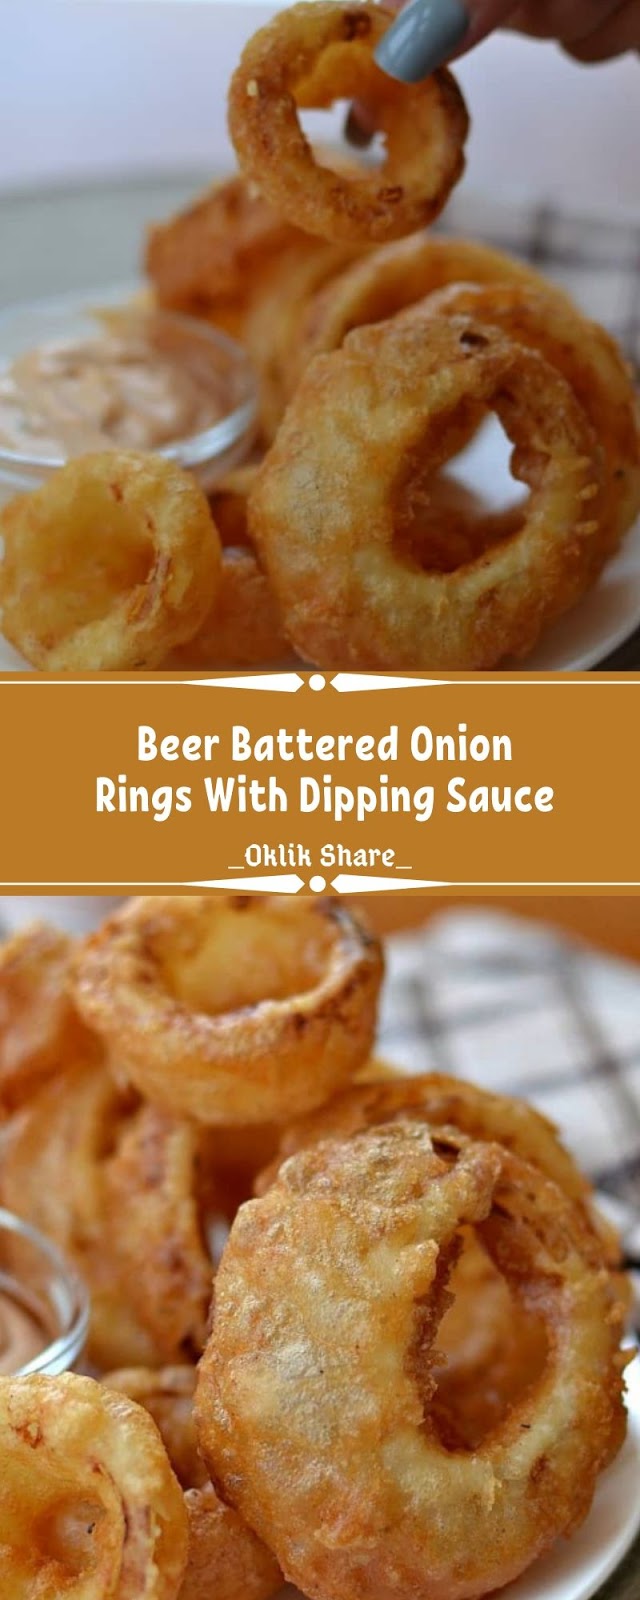 Beer Battered Onion Rings With Dipping Sauce